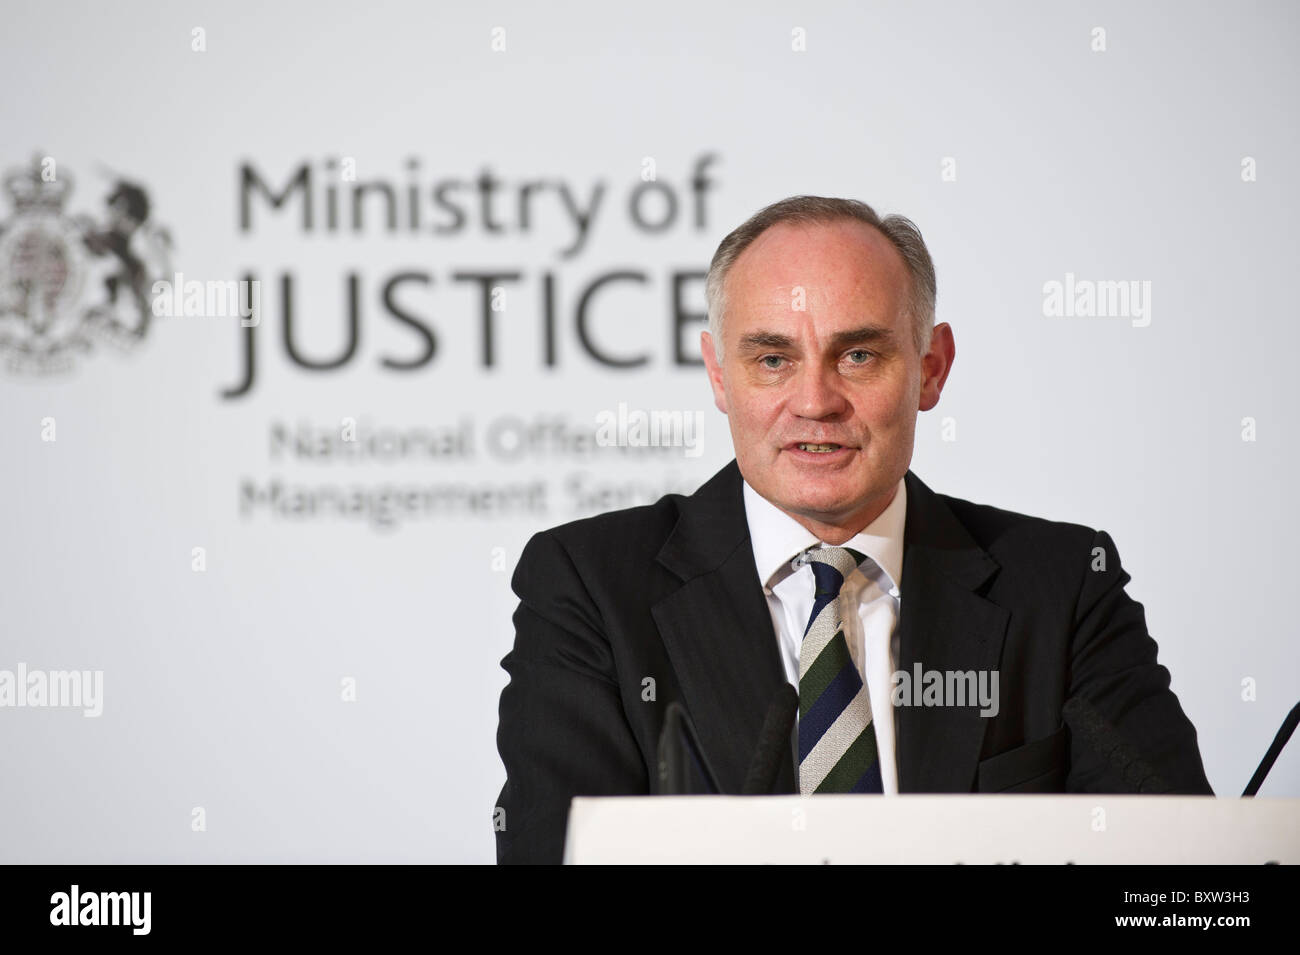 Crispin Blunt MP, Conservative Reigate, Parliamentary Under Secretary of State for Prisons and Youth Justice. Stock Photo